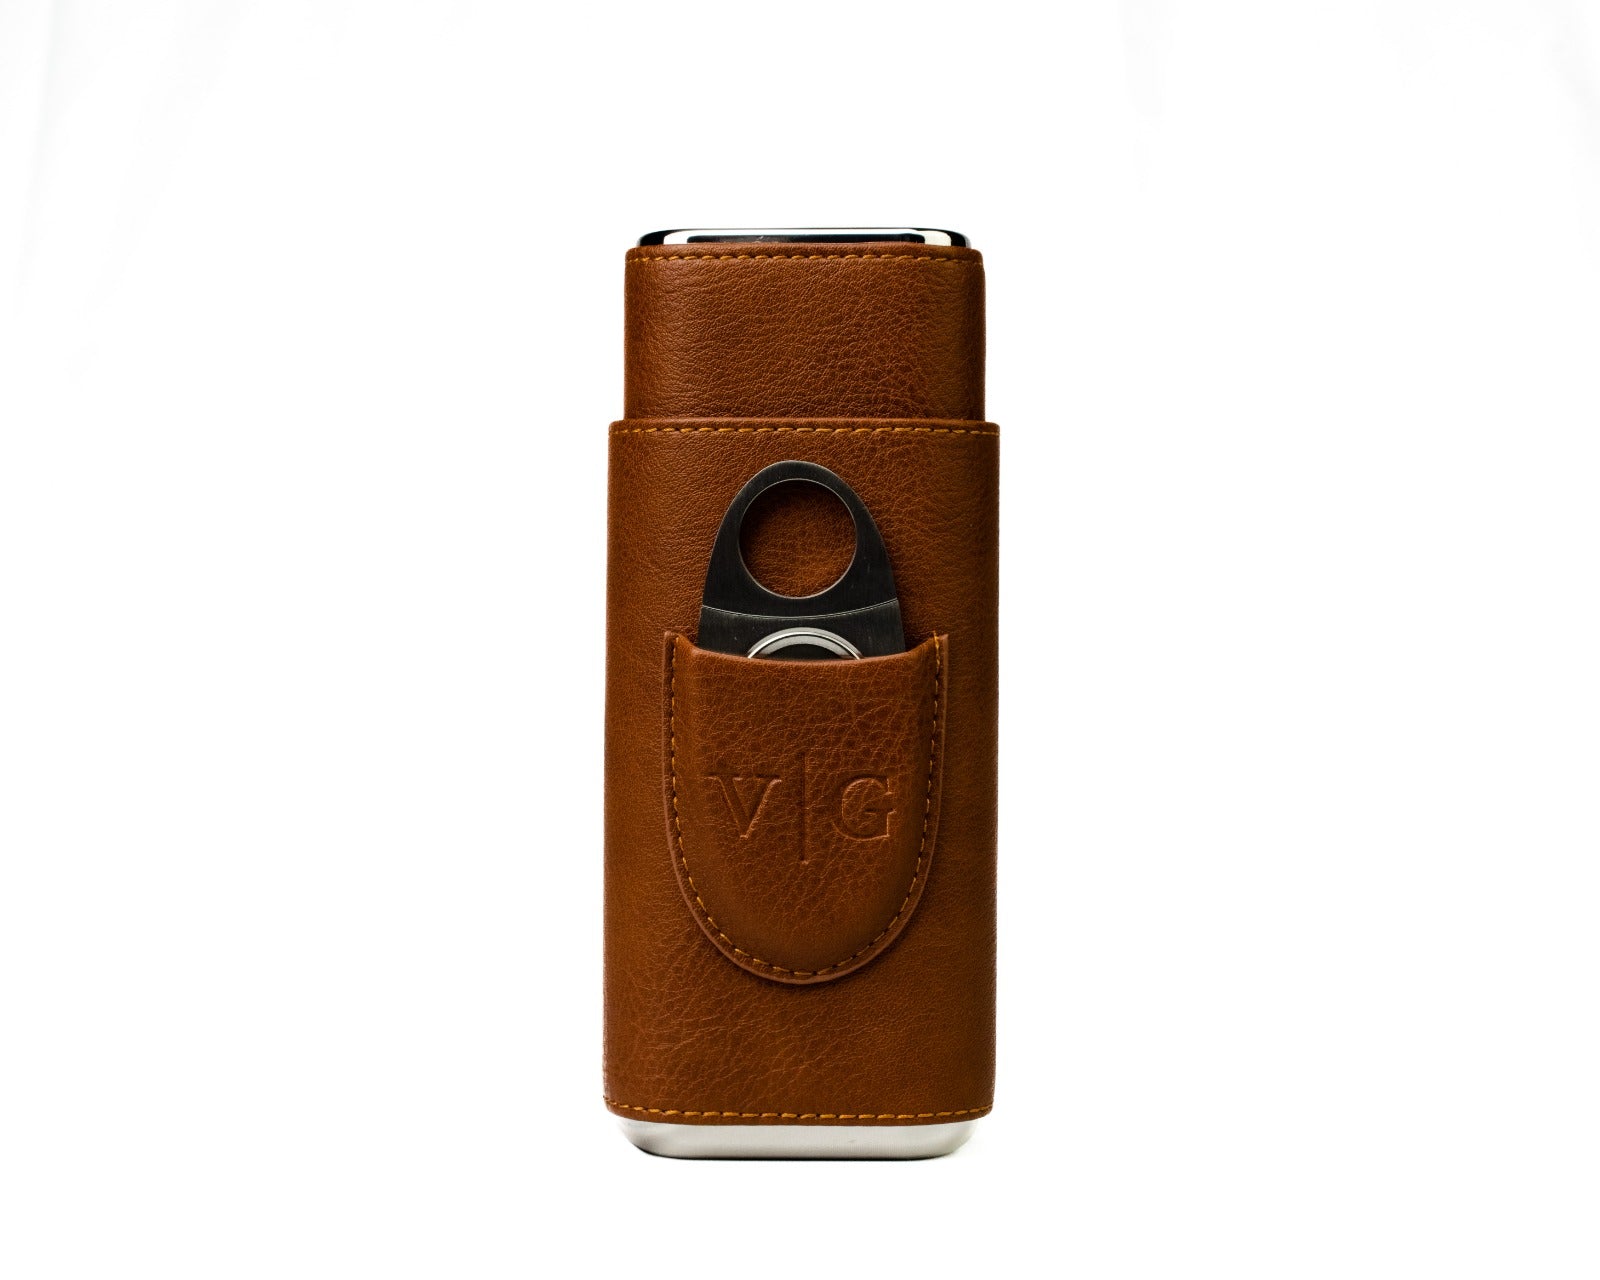 Luxury Cigar Cases - The Epitome of Elegance and Protection - The Luxury  Lifestyle Magazine